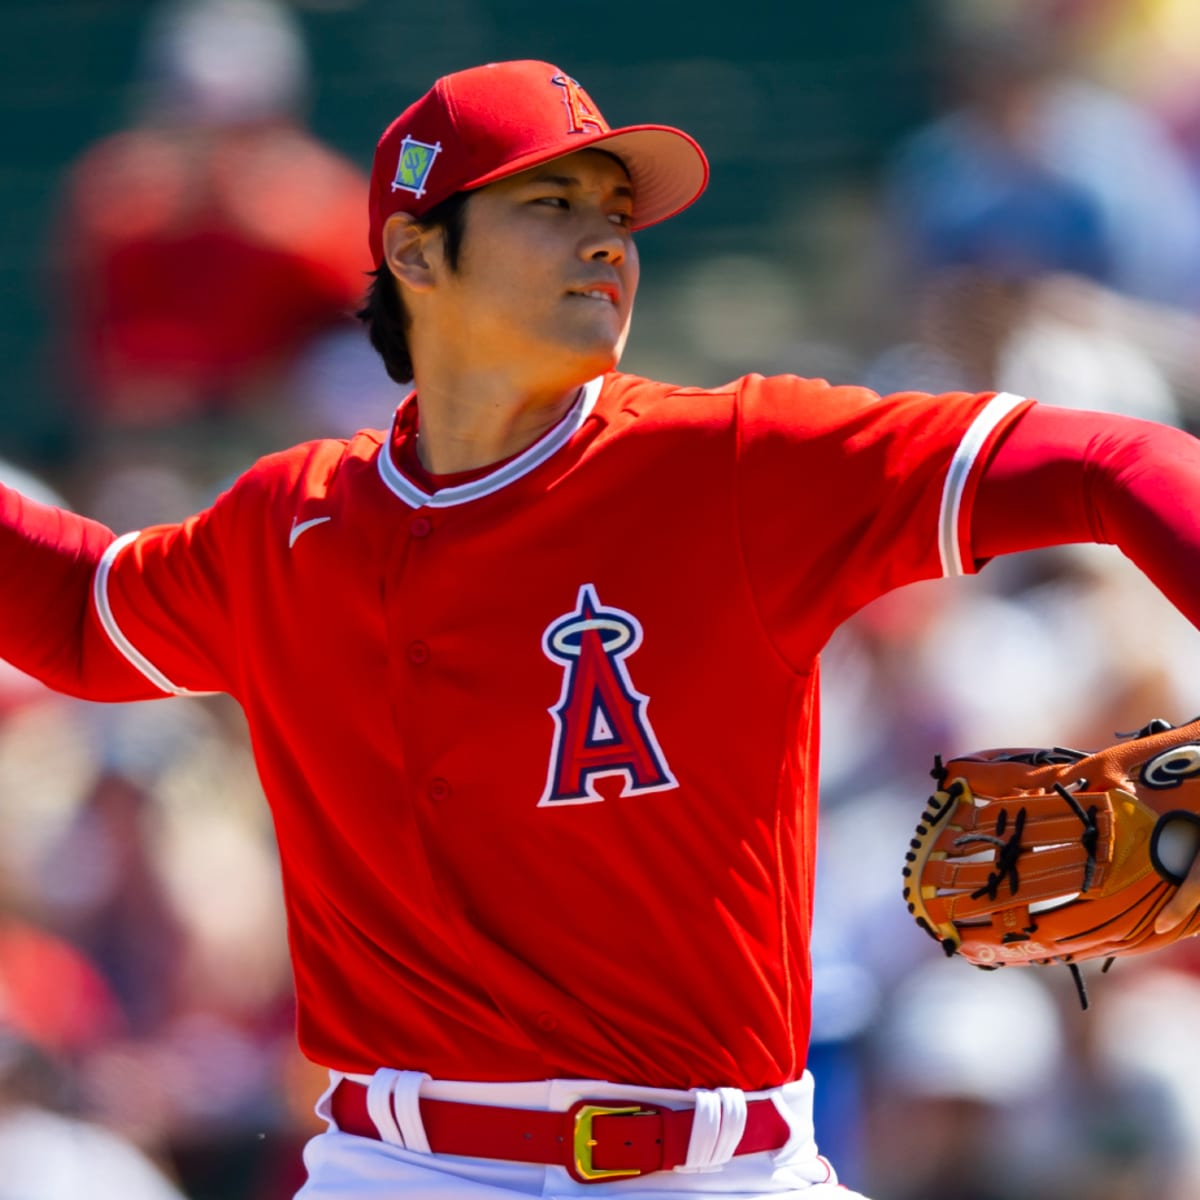 If Shohei Ohtani is made available for trade this winter, could the Mets  pounce? 🤔 Using the Nats-Dodgers trade involving Max Scherzer…